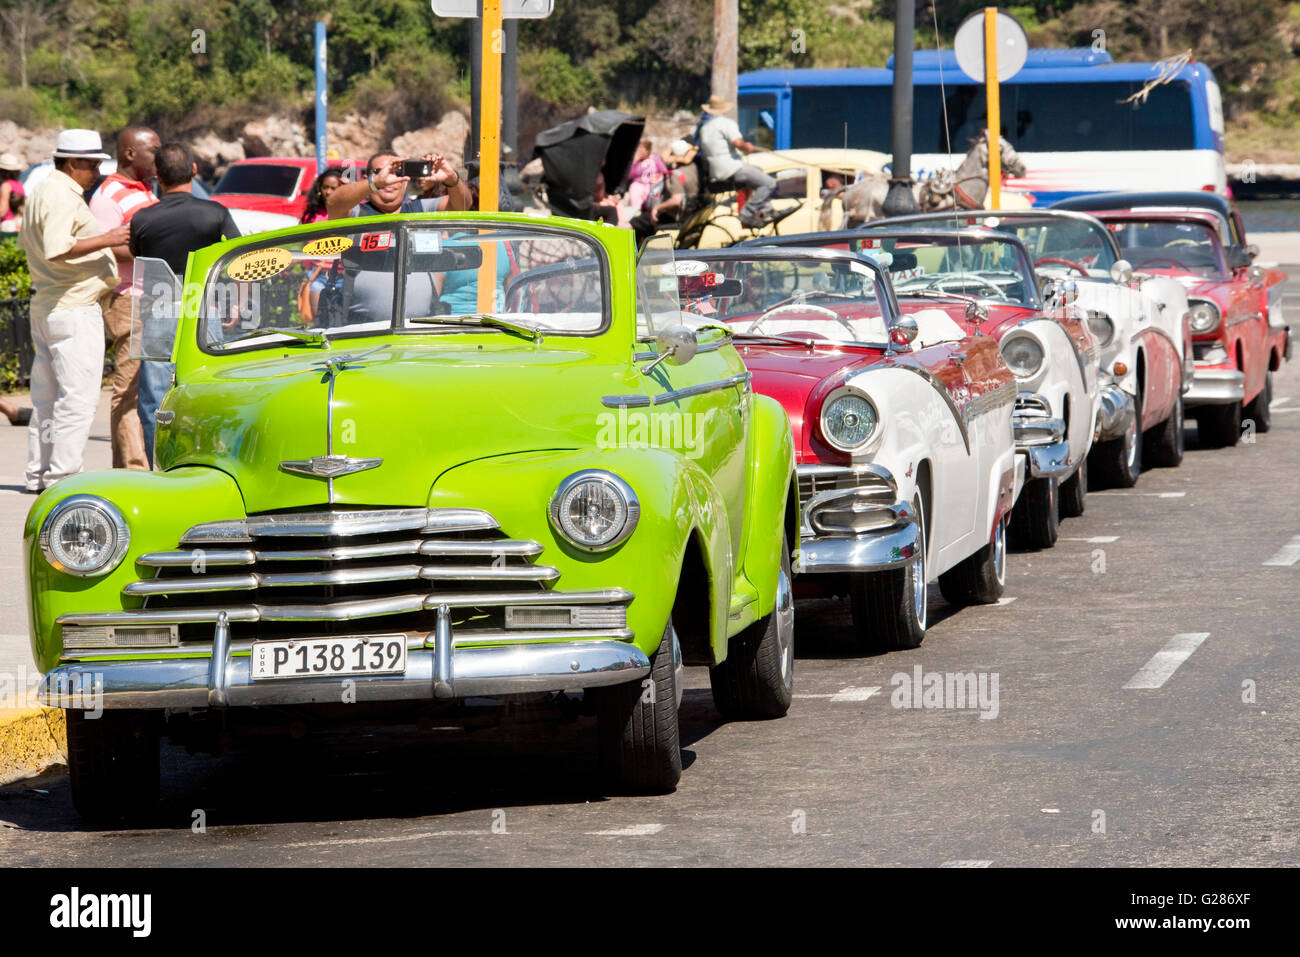 A row of old American cars lined up in Havana with a 1948 Chevrolet Fleetmaster in the foreground. Stock Photo